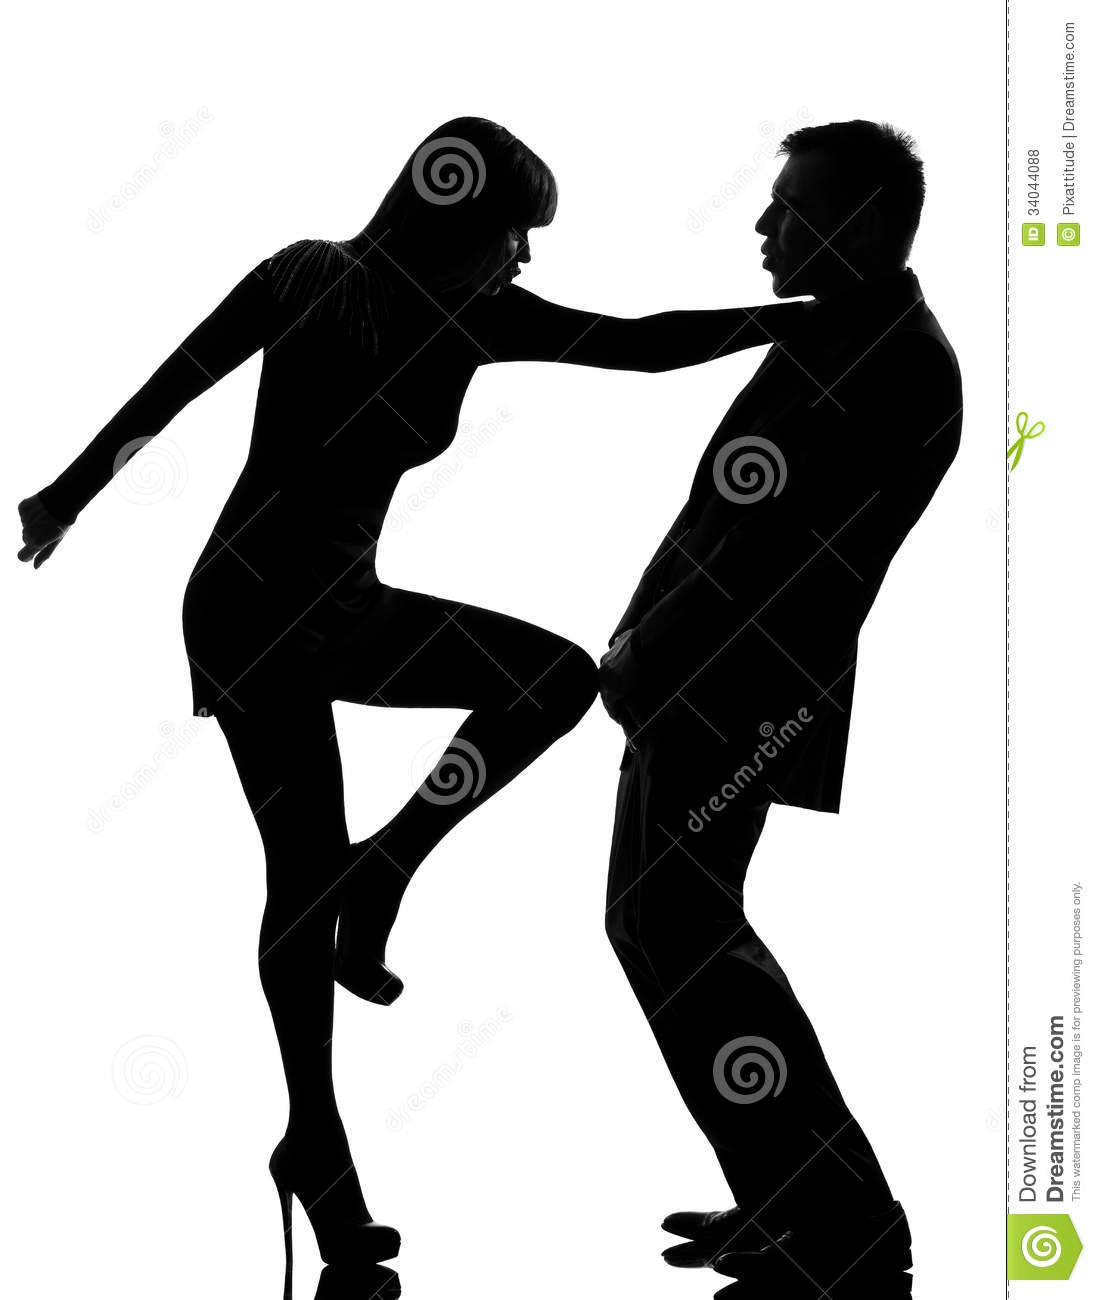 One Couple Man And Woman Domestic Violence Royalty Free Stock Photos    